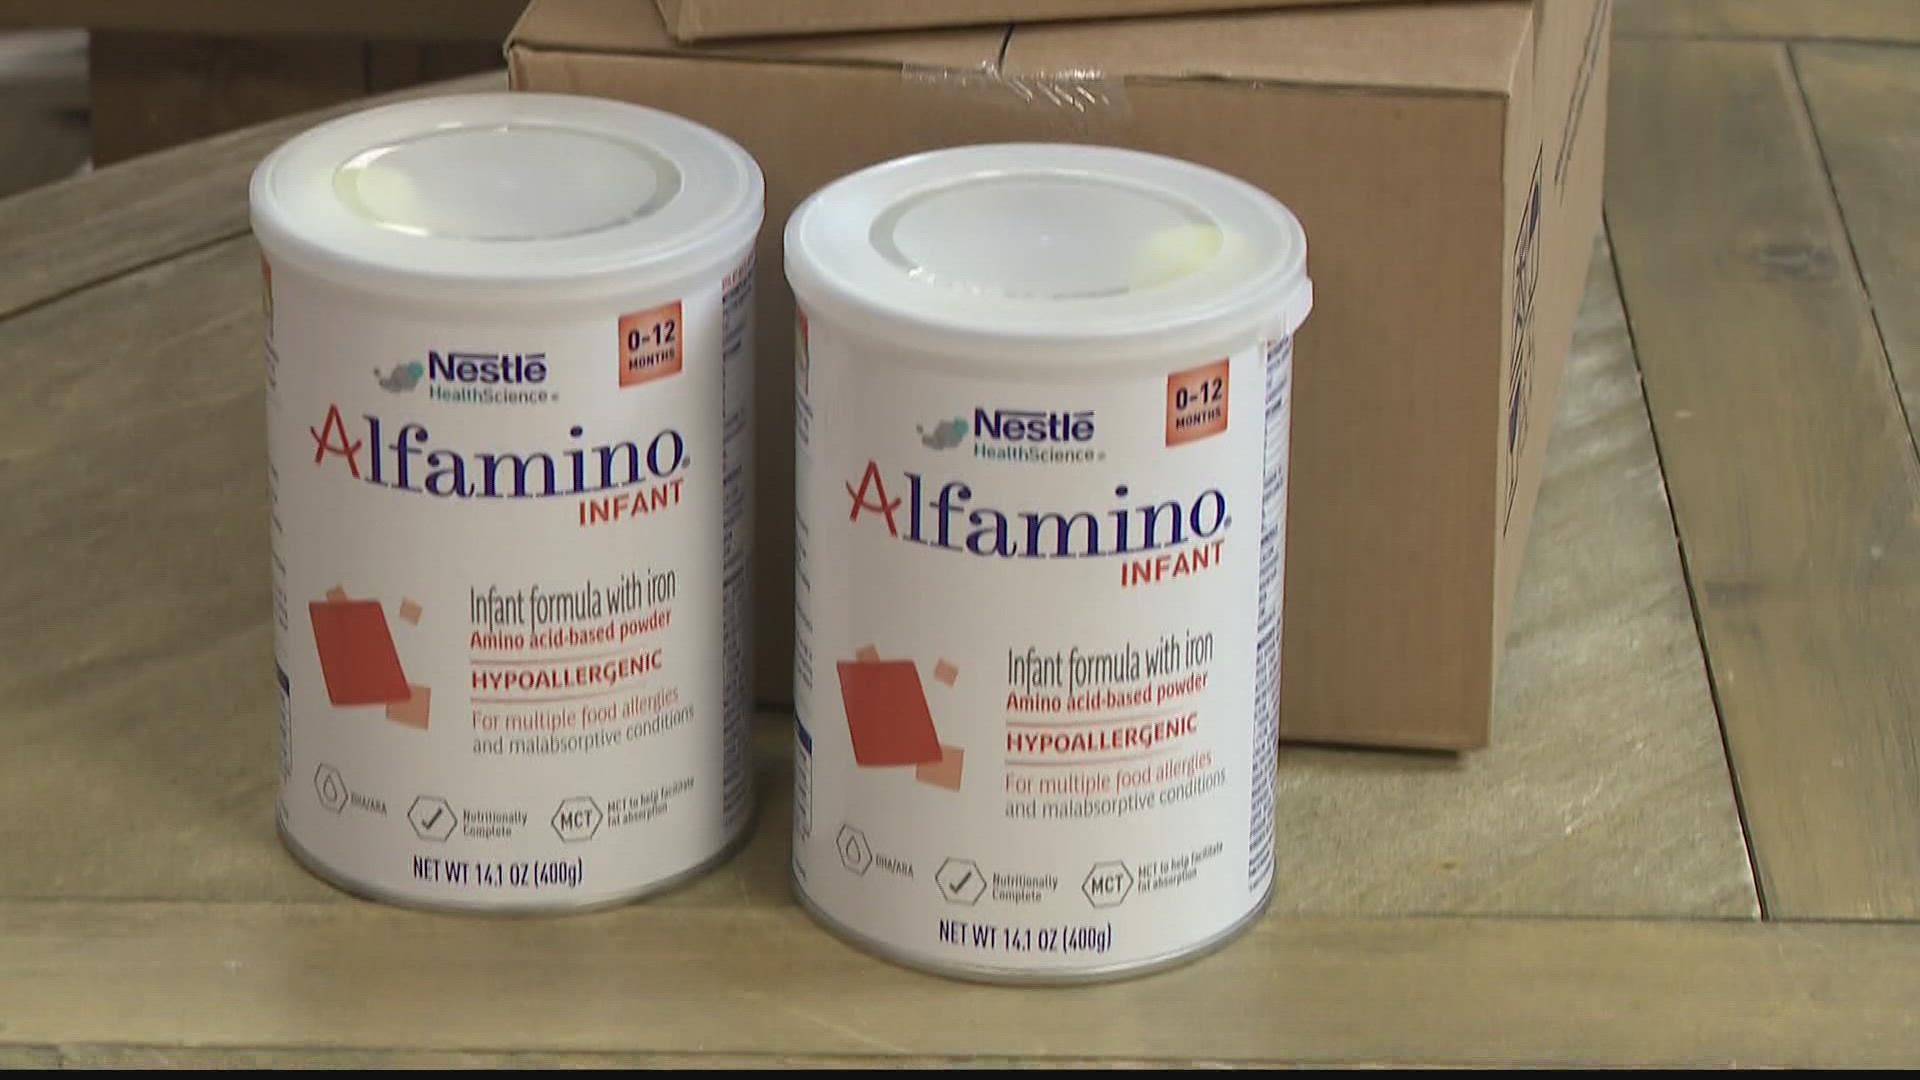 You're looking at new shipments of baby formula. That the supply bank just distributed to local families today.